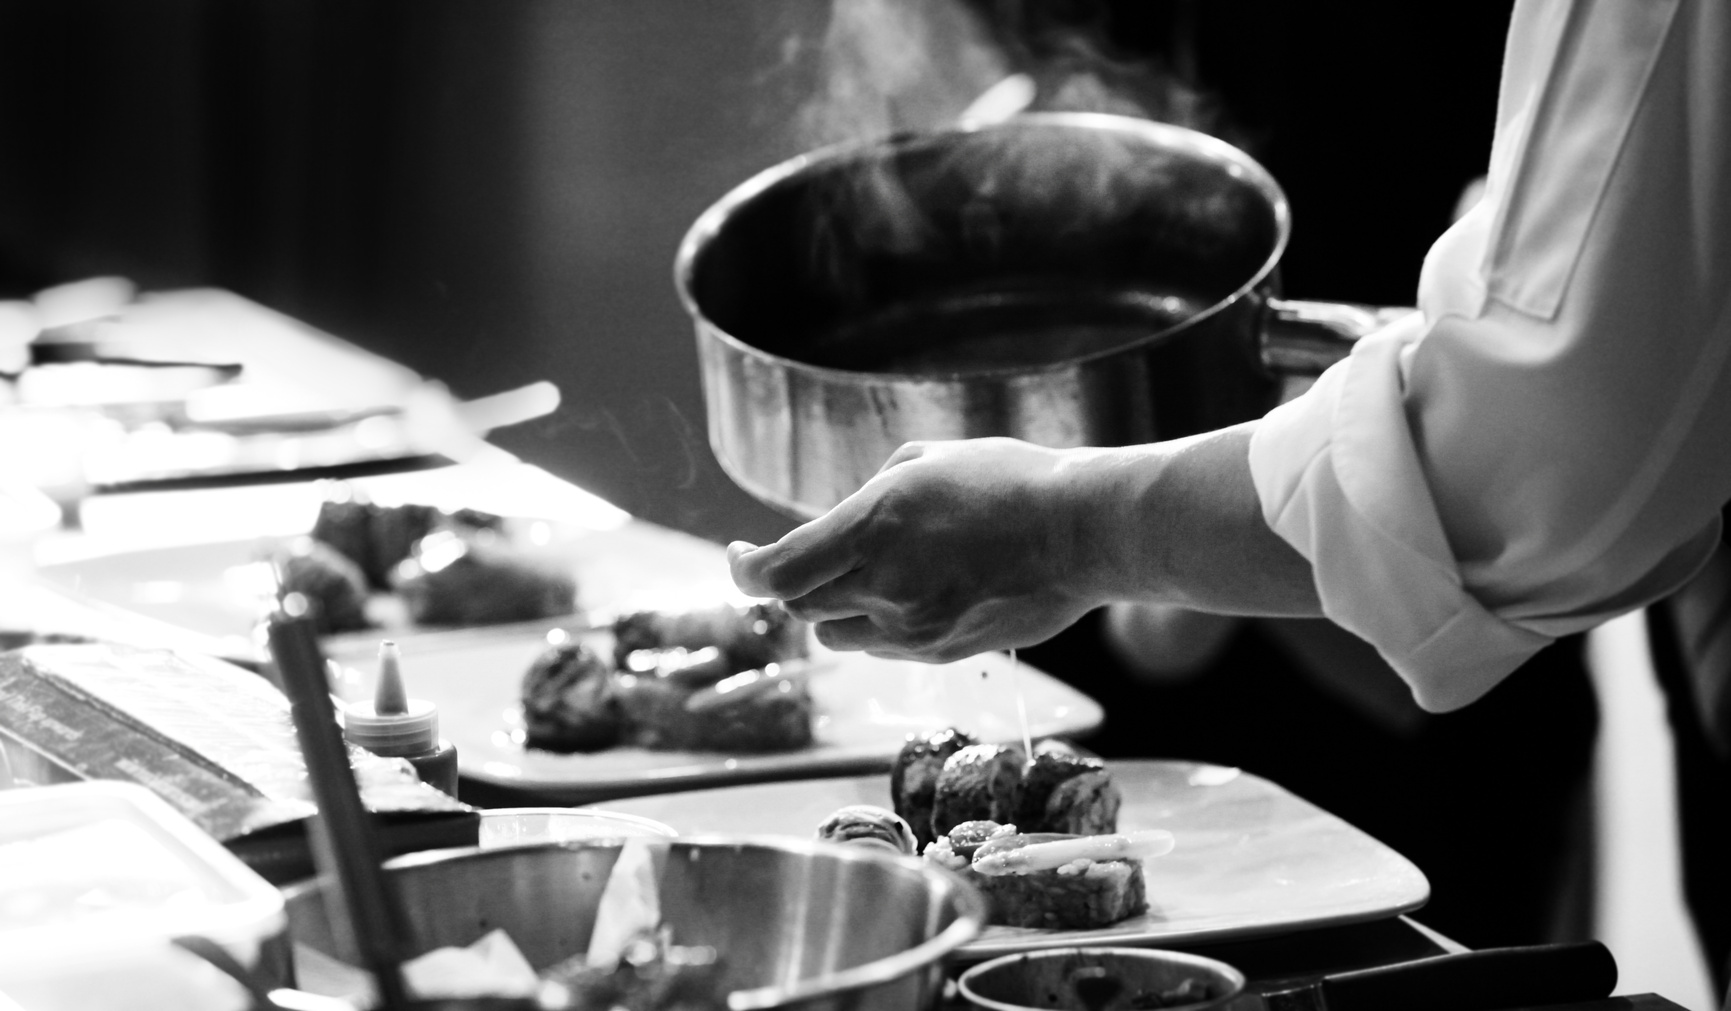 chef preparing food, chef cooking in a kitchen, chef at work, Black & White